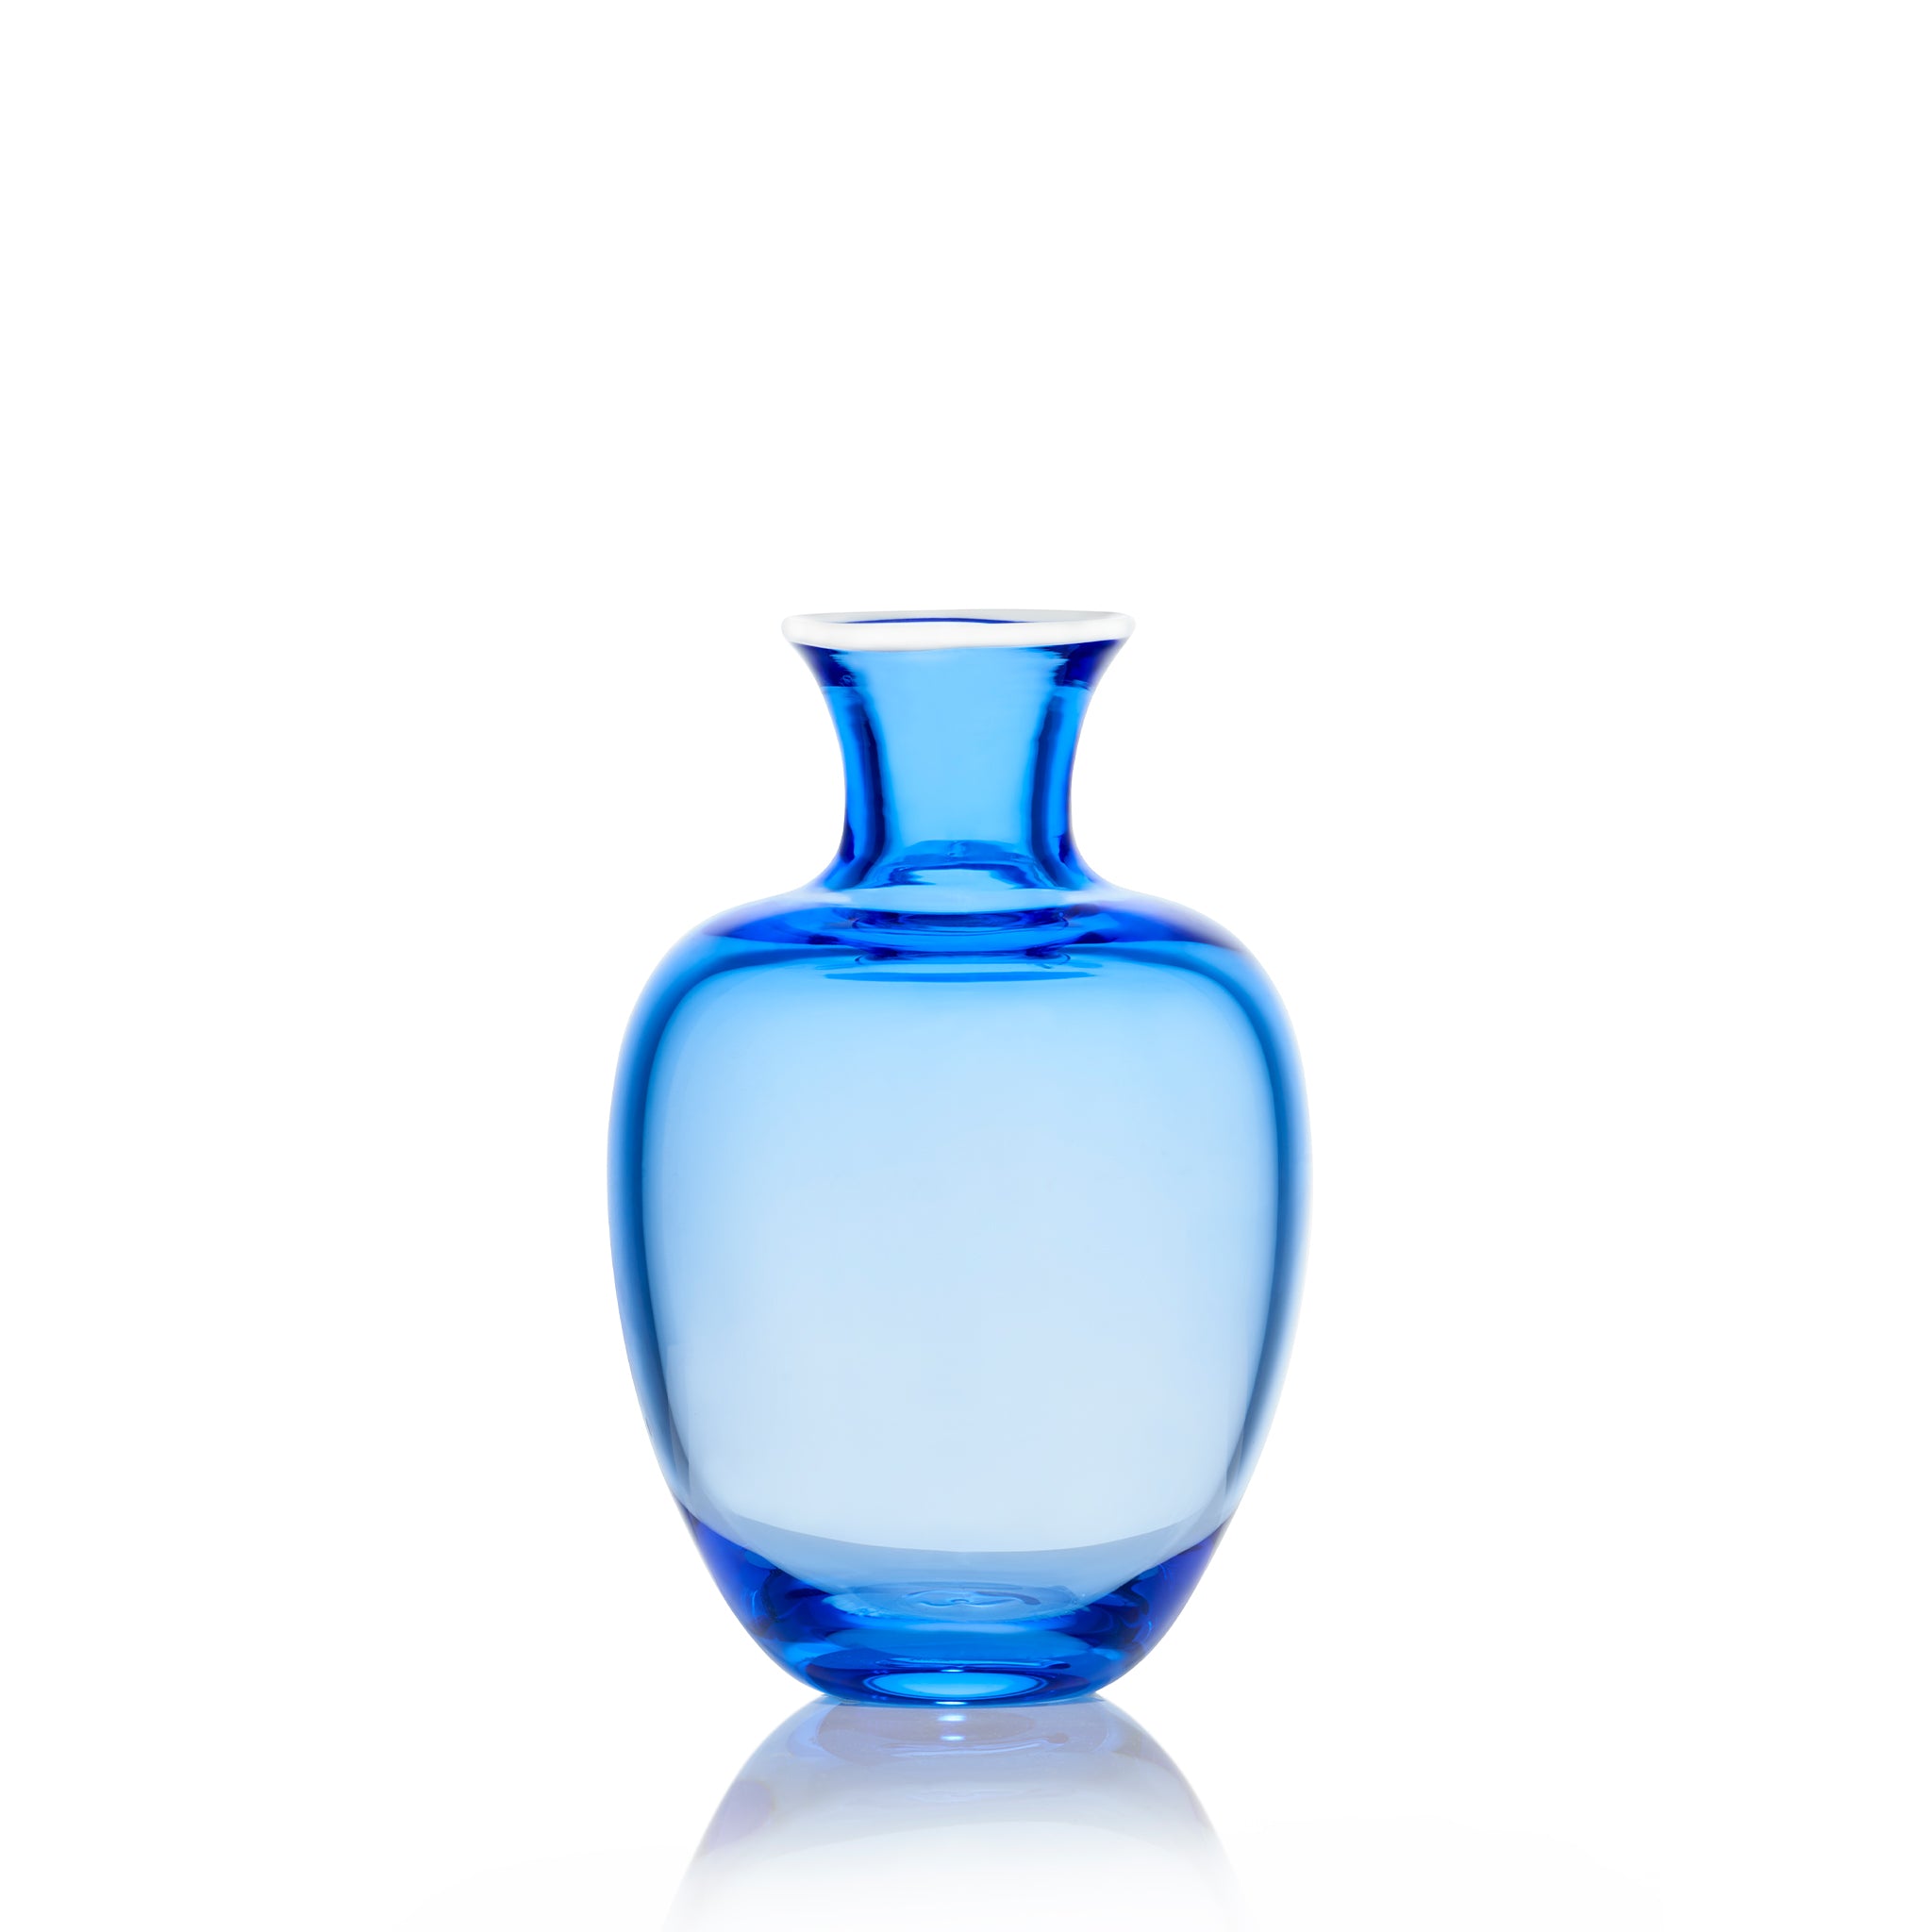 Handblown Glass Bumba Bedside Carafe and Glass Set in Royal Blue, 0.5L